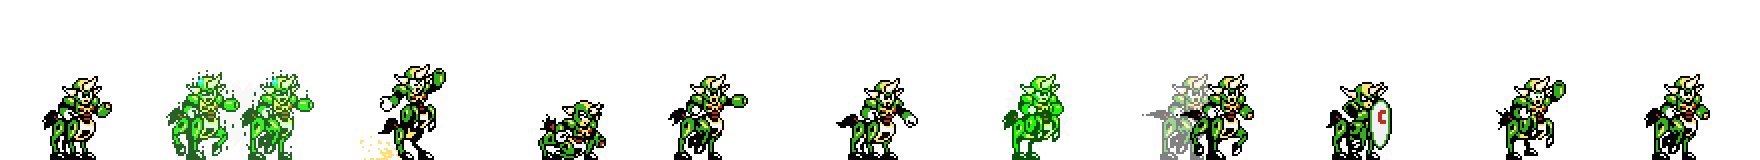 Centaur Man | Base Sprite Right<div style="margin-top: 4px; letting-spacing: 1px; font-size: 90%; font-family: Courier New; color: rgb(159, 150, 172);">[robot:right:base]{centaur-man}</div>